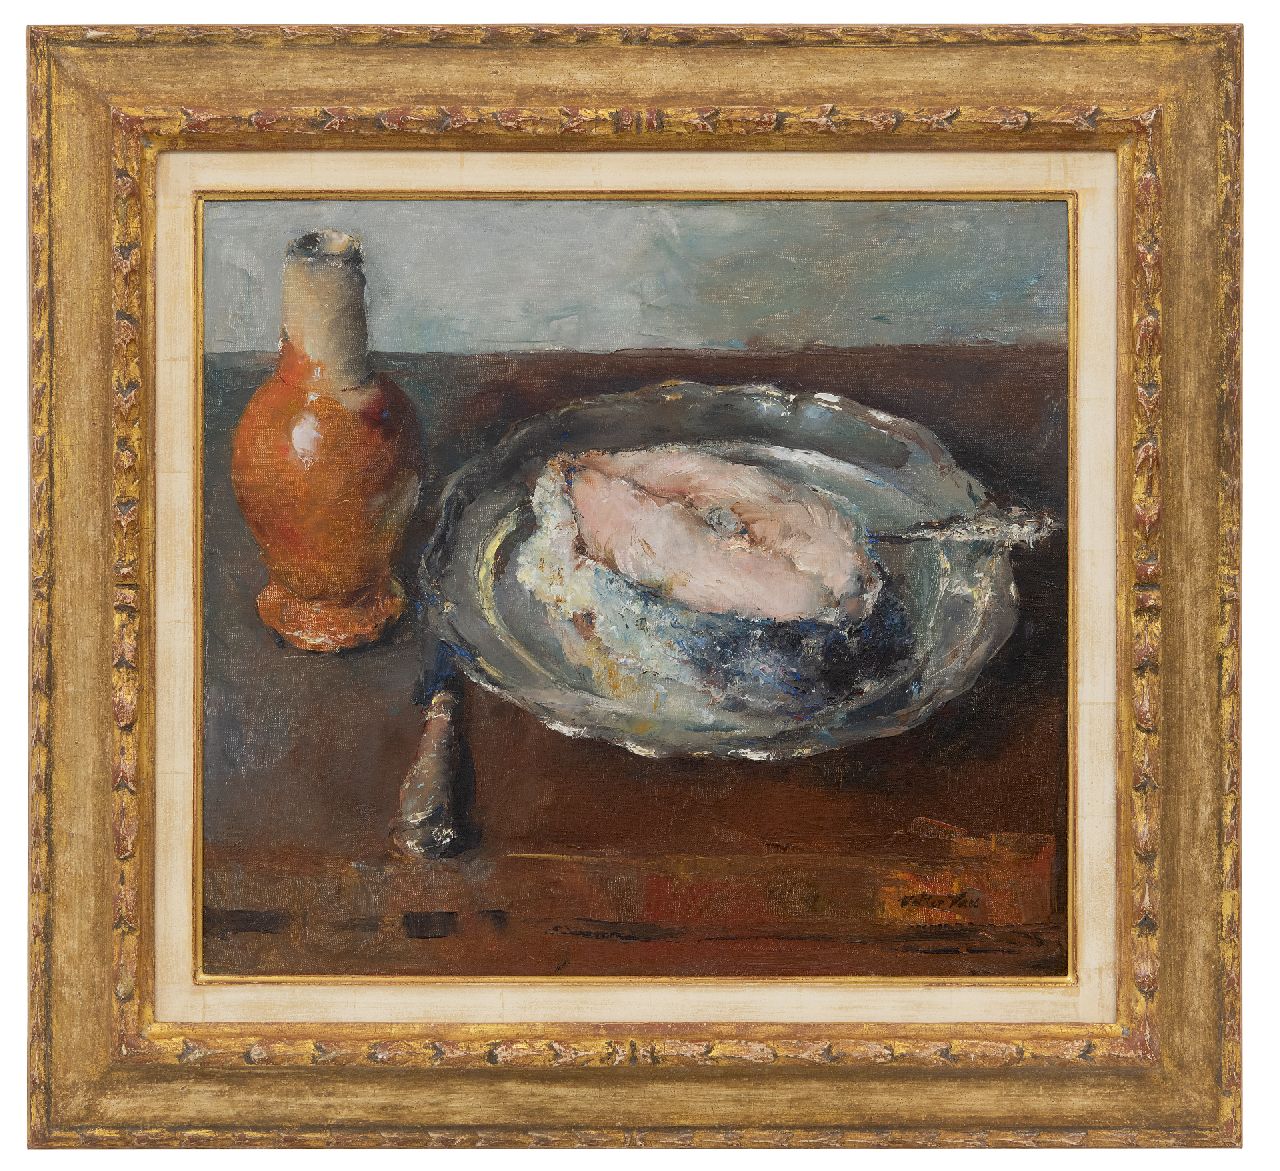 Vaes W.  | Walter Vaes | Paintings offered for sale | Fish on a tin plate, oil on canvas 40.1 x 45.1 cm, signed l.r.